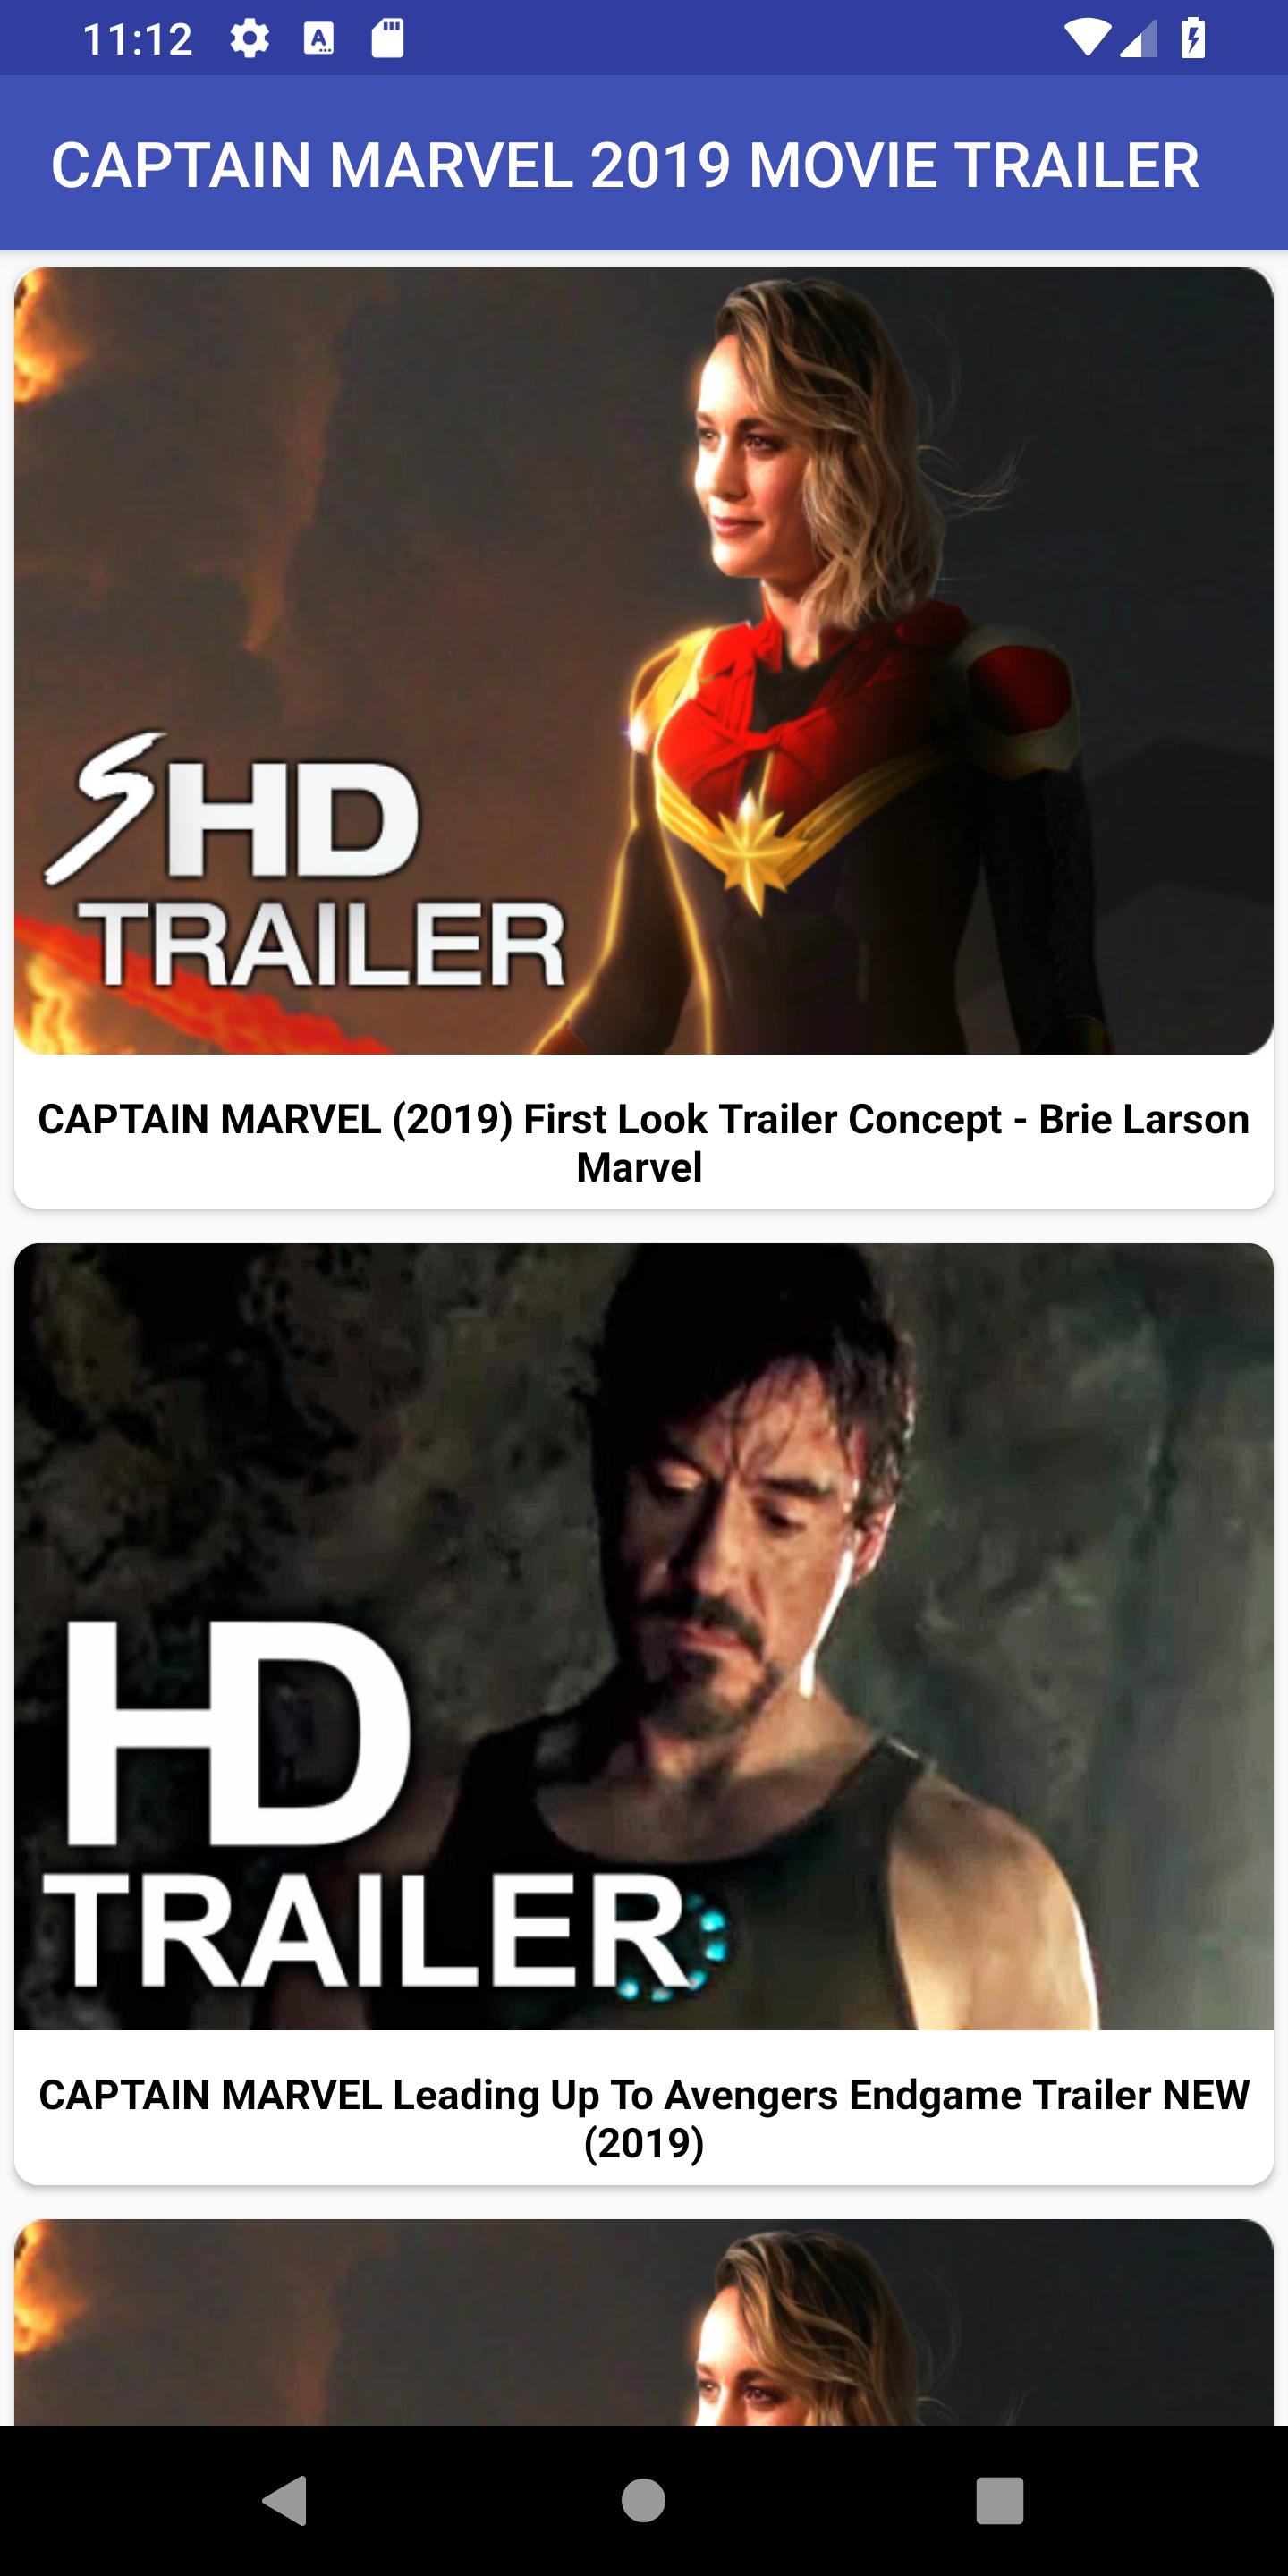 CAPTAIN MARVEL 2019 MOVIE TRAILER for Android - APK Download